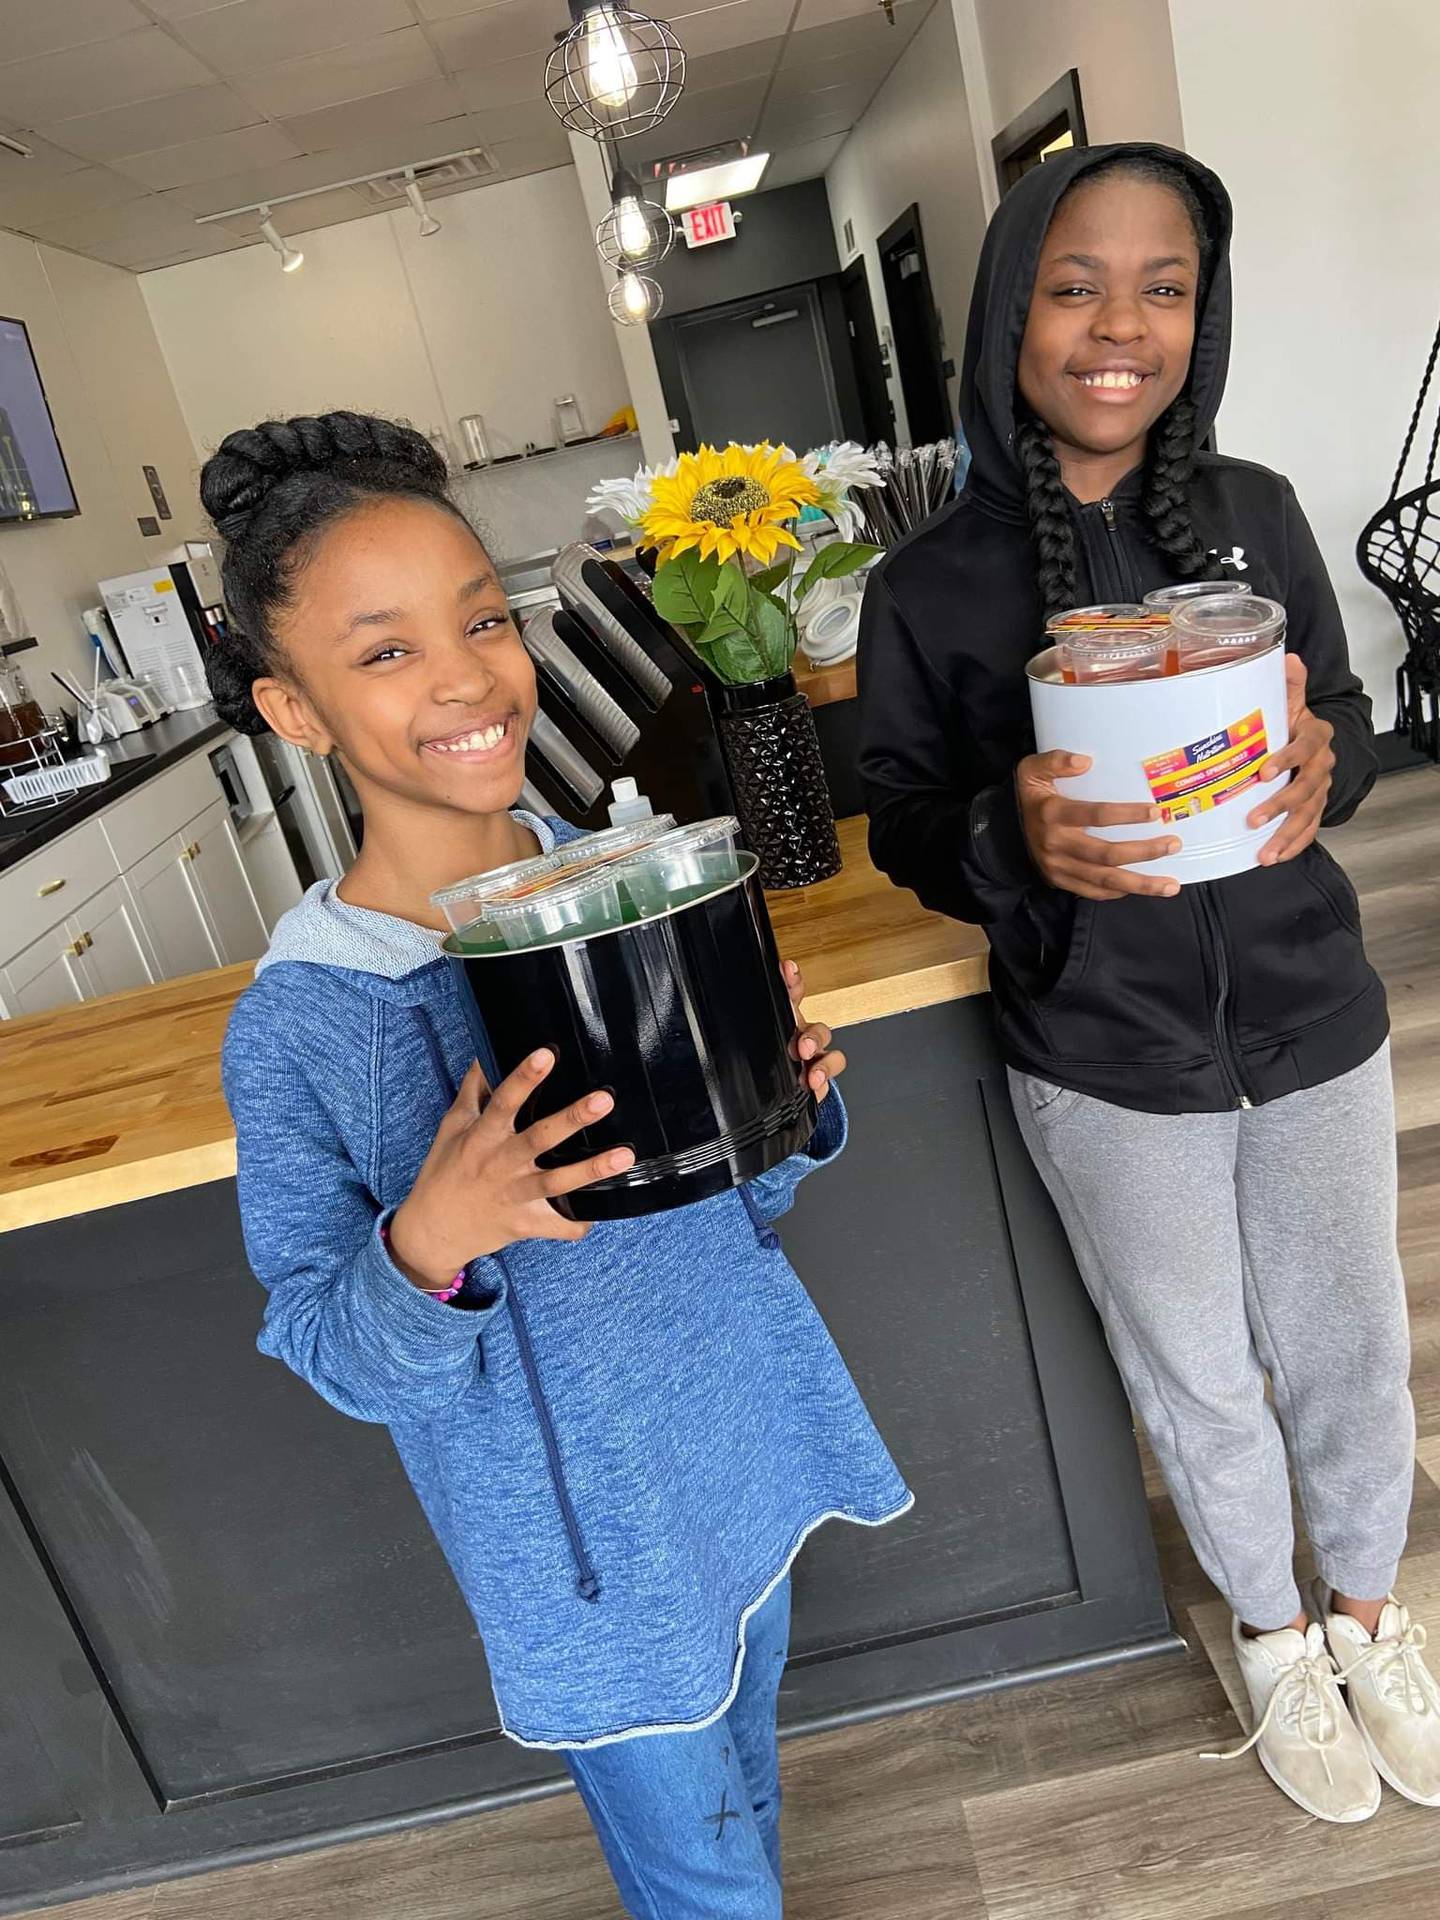 Sunshine Nutrition in New Lenox offers a smoothie juice bar with nutritional choices: healthy shakes, smoothies and teas.  The owners are Lucky and Terry Collins of Steger.  Their daughters Harmony Collins and Serenity Collins showcase some of the store's products.